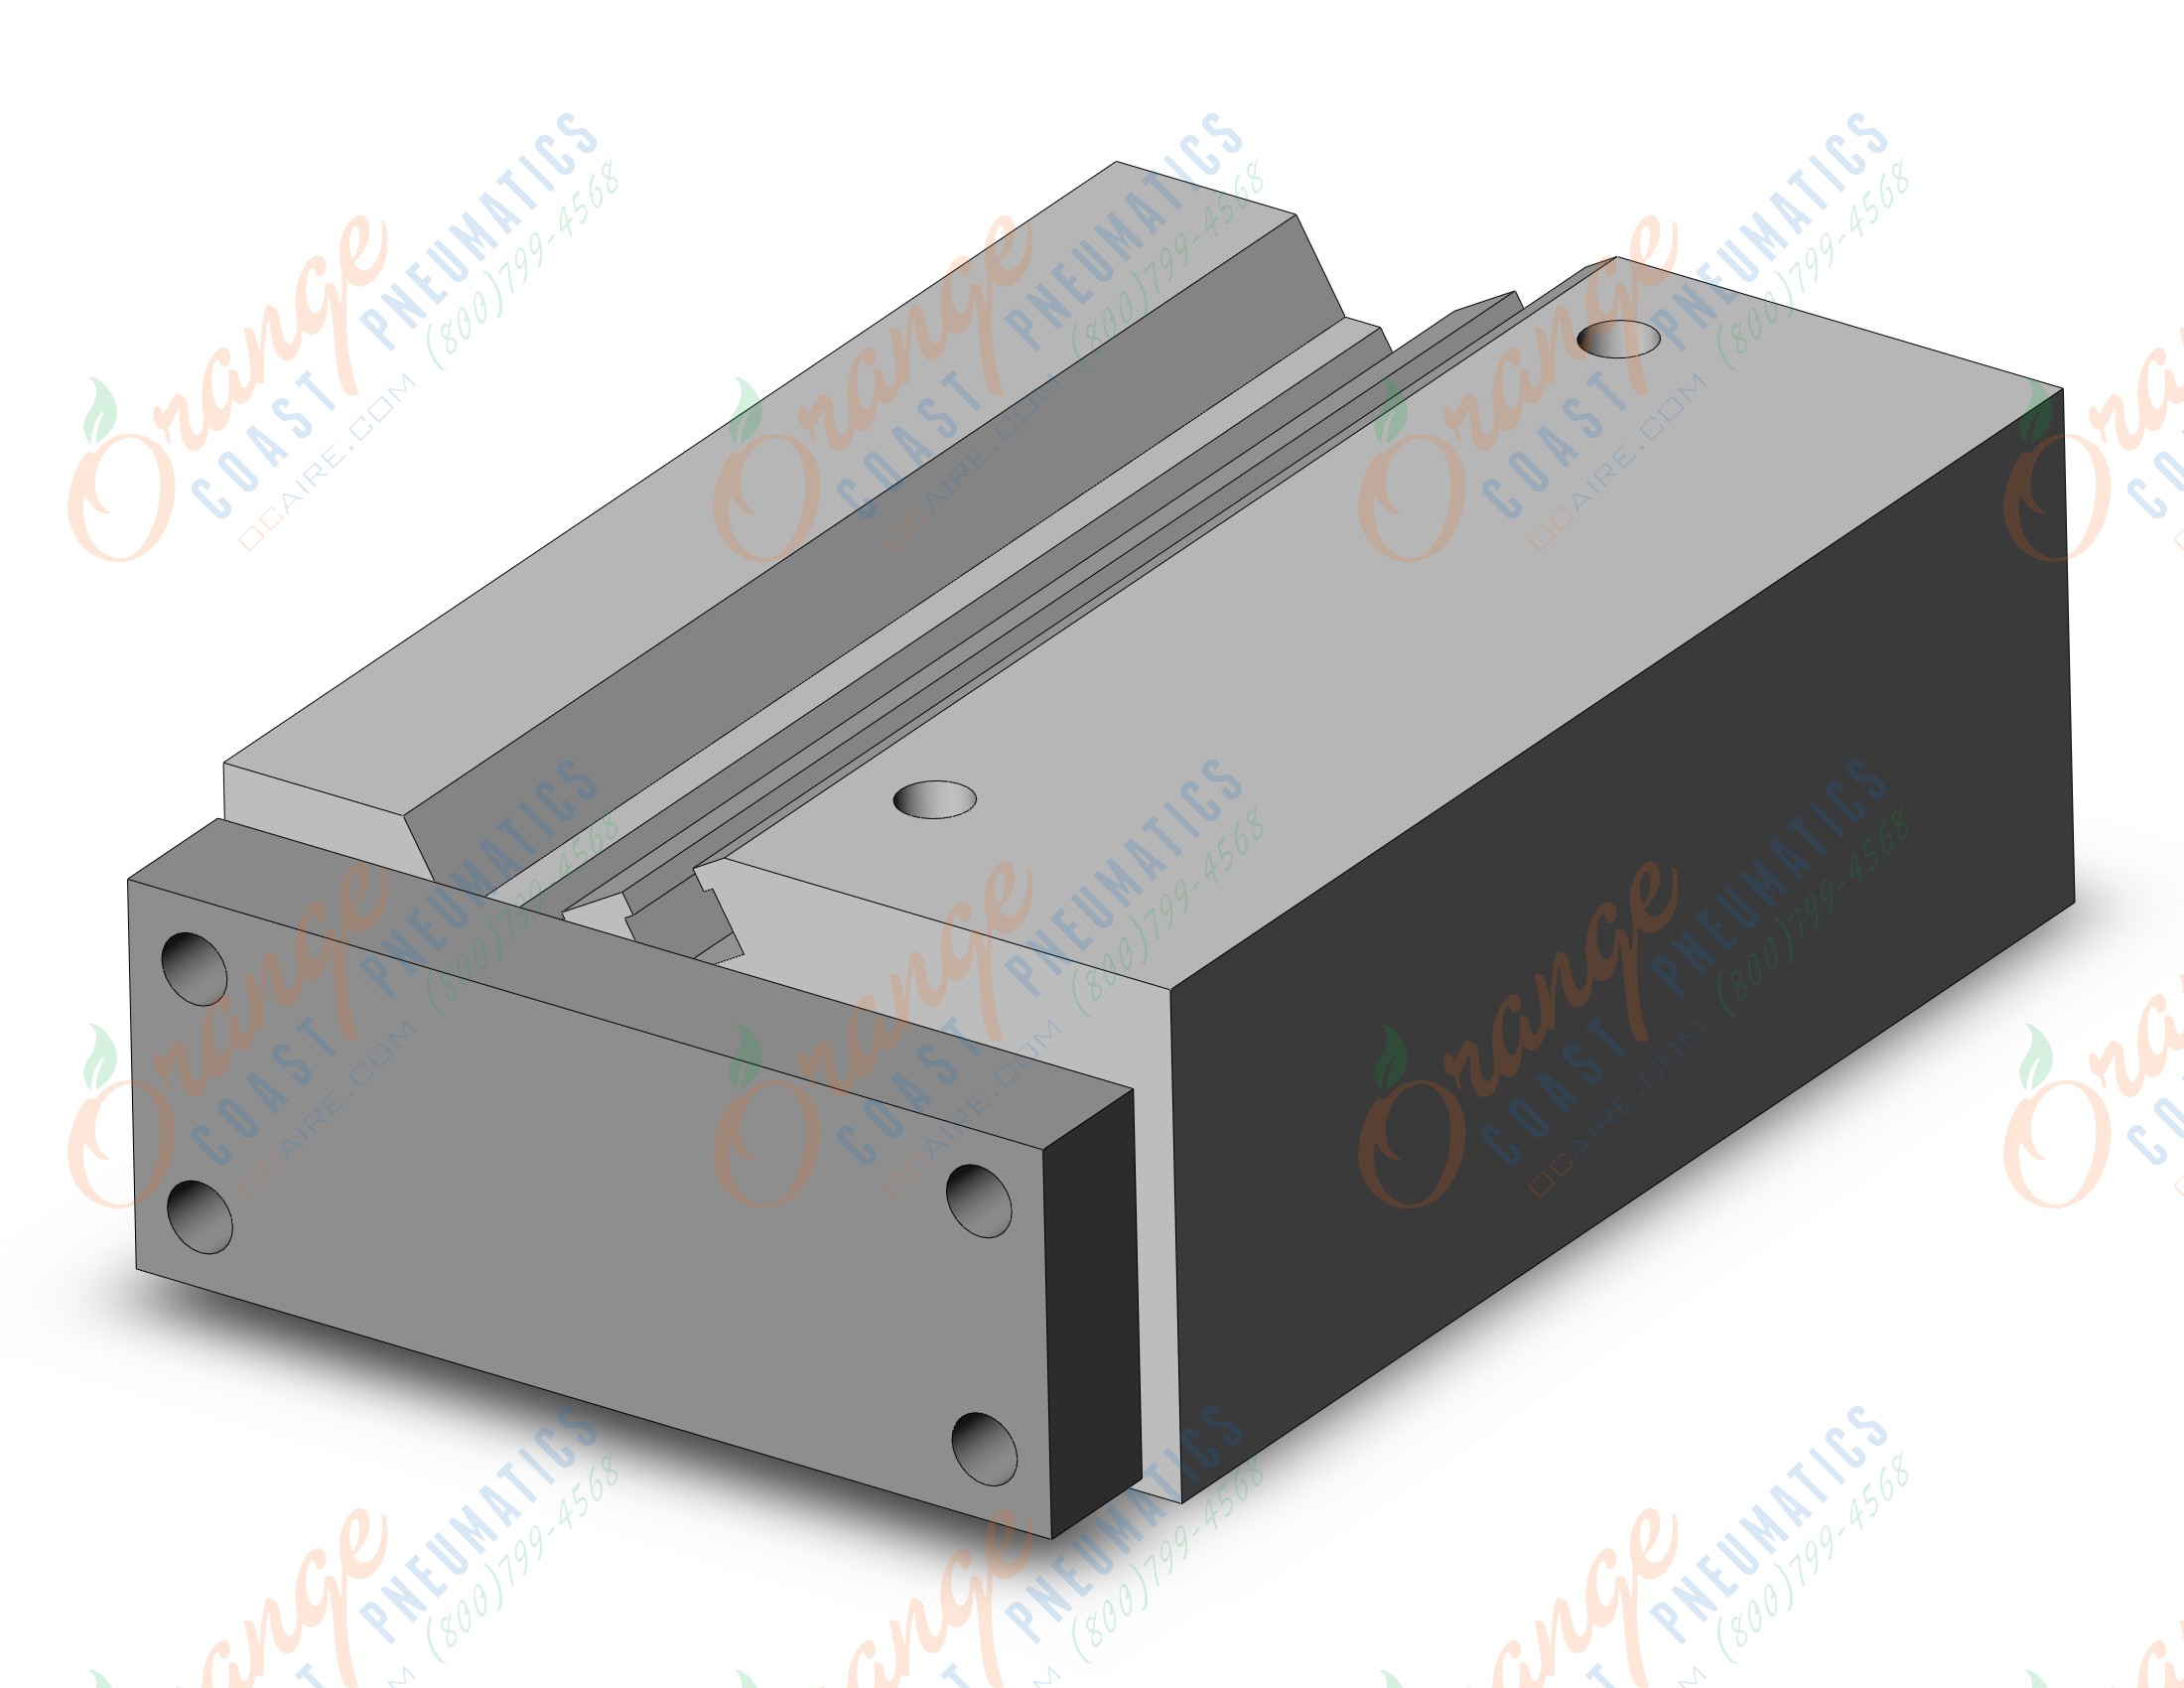 New SMC Compact Slide Bearing Guided Pneumatic Cylinder  MGQM12-40 